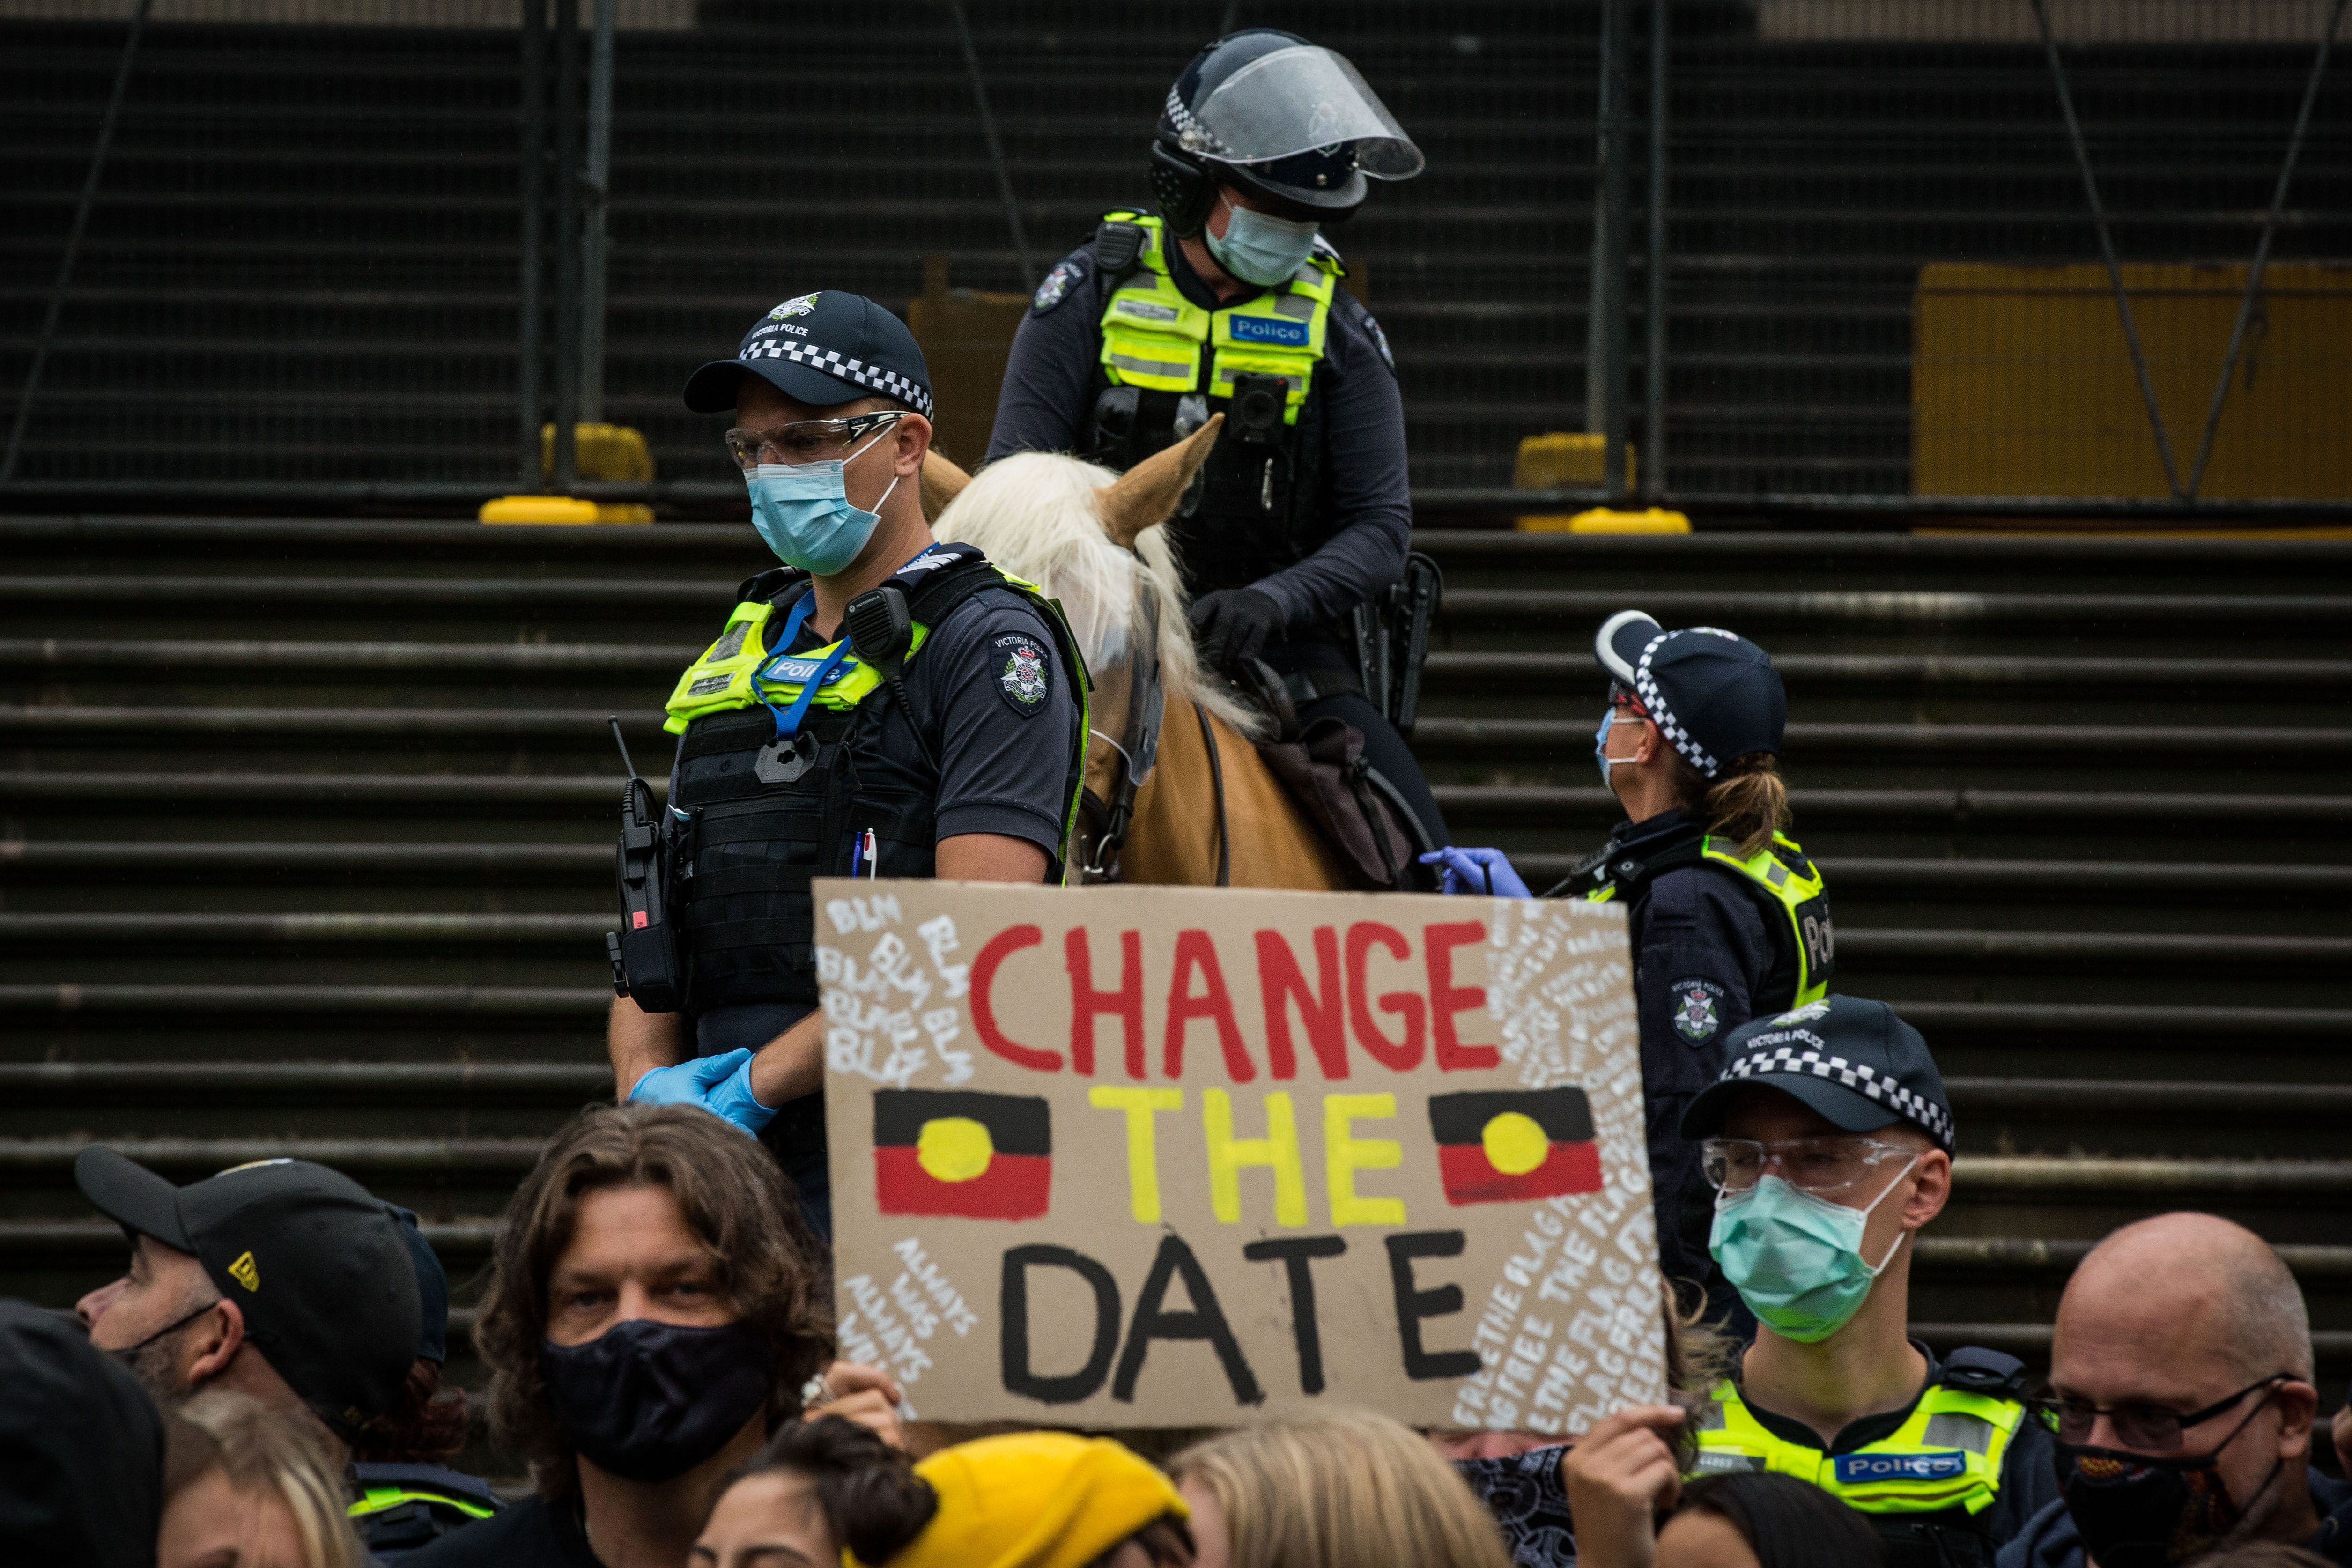 Police officers stand watch as protesters display signs at the Invasion Day rally in the city on January 26